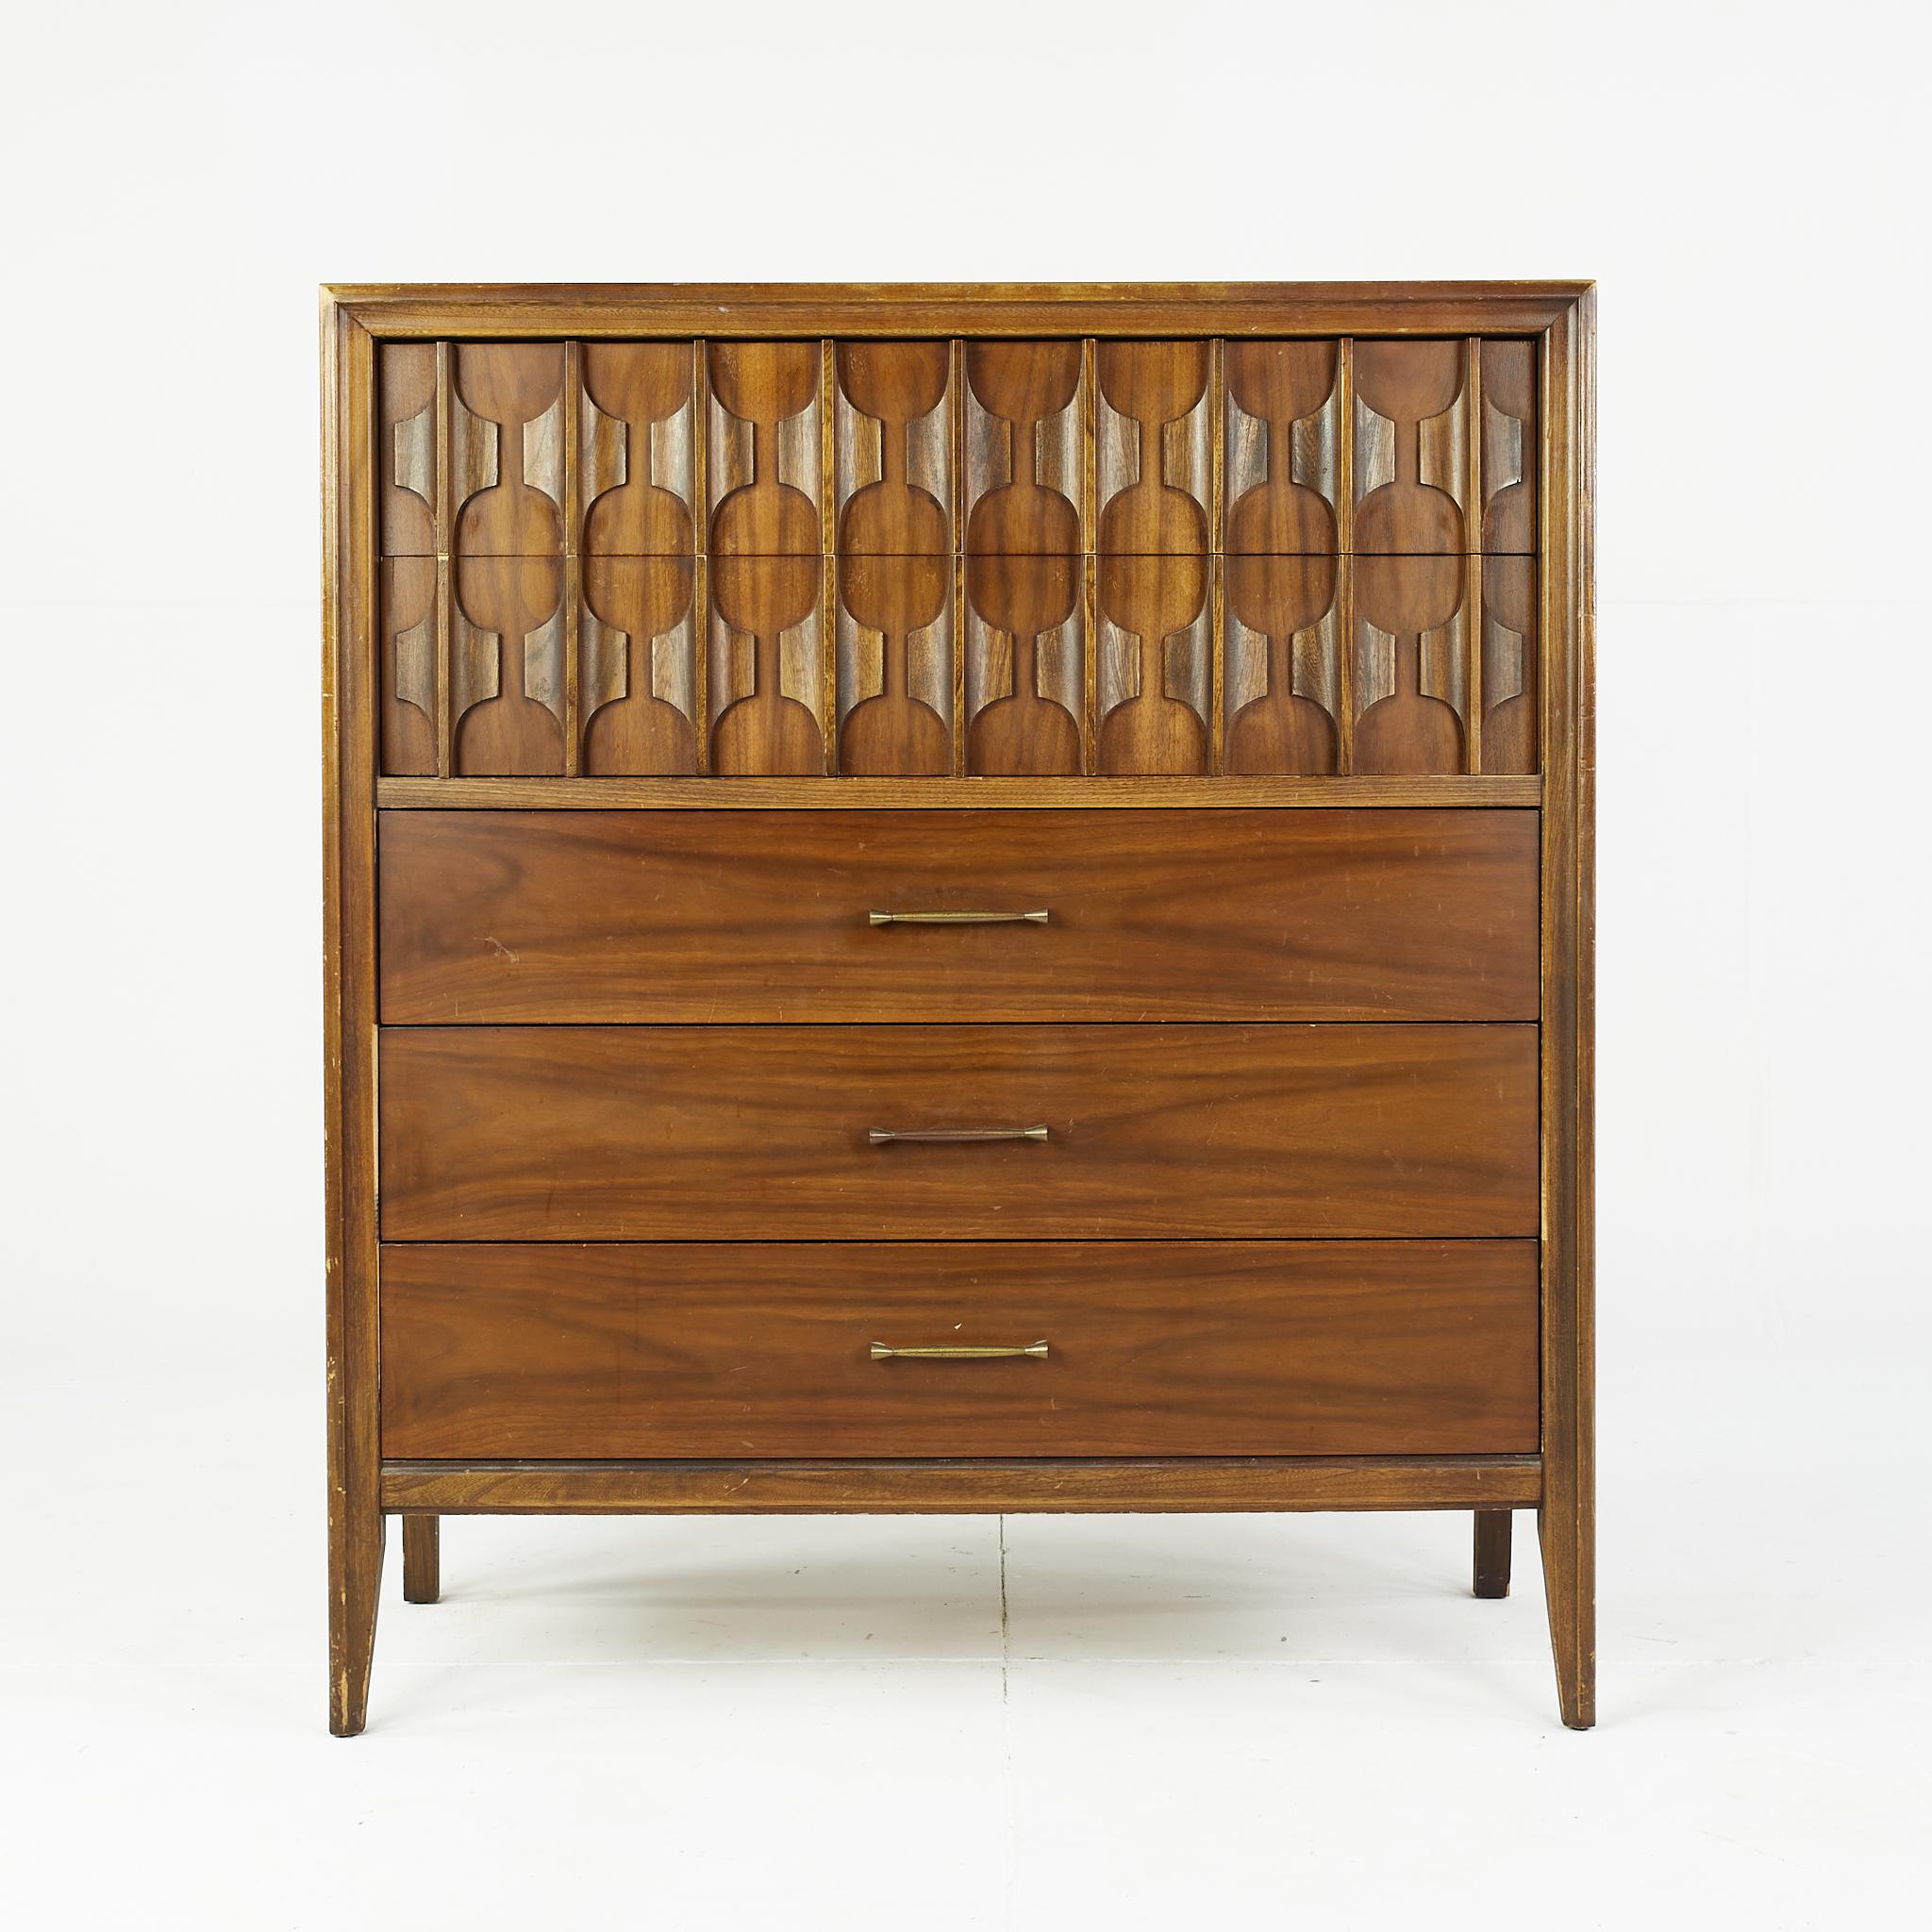 Kent Coffey mid century walnut highboy dresser

This dresser measures: 40 wide x 19 deep x 46 inches high

All pieces of furniture can be had in what we call restored vintage condition. That means the piece is restored upon purchase so it’s free